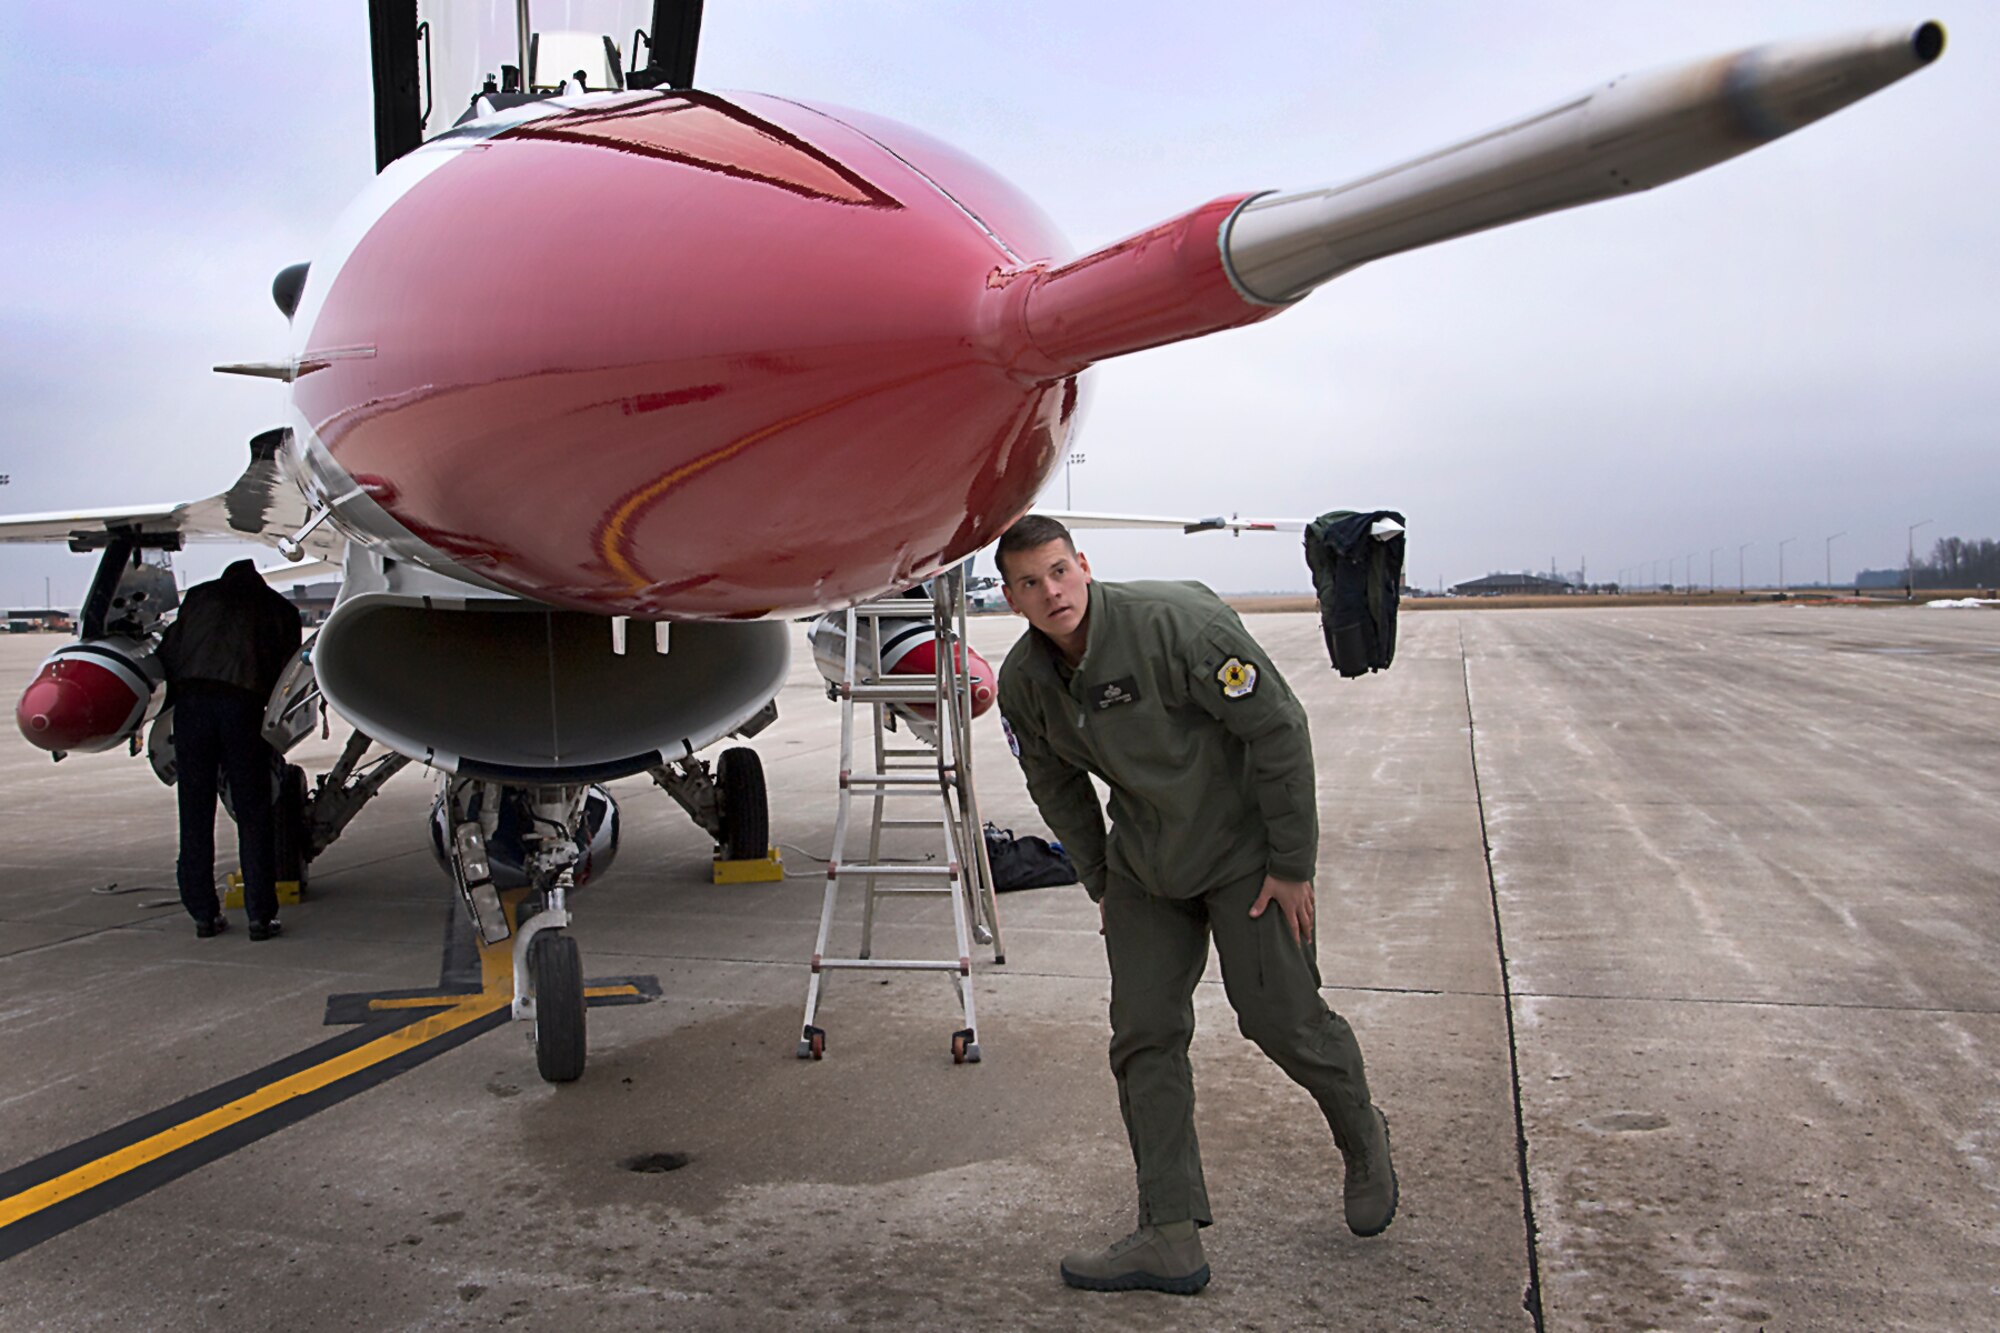 Tech. Sgt. Bryson Schuster, Thunderbird crew chief and maintenance team advance member, does a post-flight inspection upon landing at Grissom Air Reserve Base, Ind., Feb. 5, 2019. Schuster visited and spoke with maintenance team members and toured facilities prior to the team’s arrival for the Grissom Air and Space Expo scheduled for Sept. 7-8, 2019. (U.S. Air Force photo/Douglas Hays